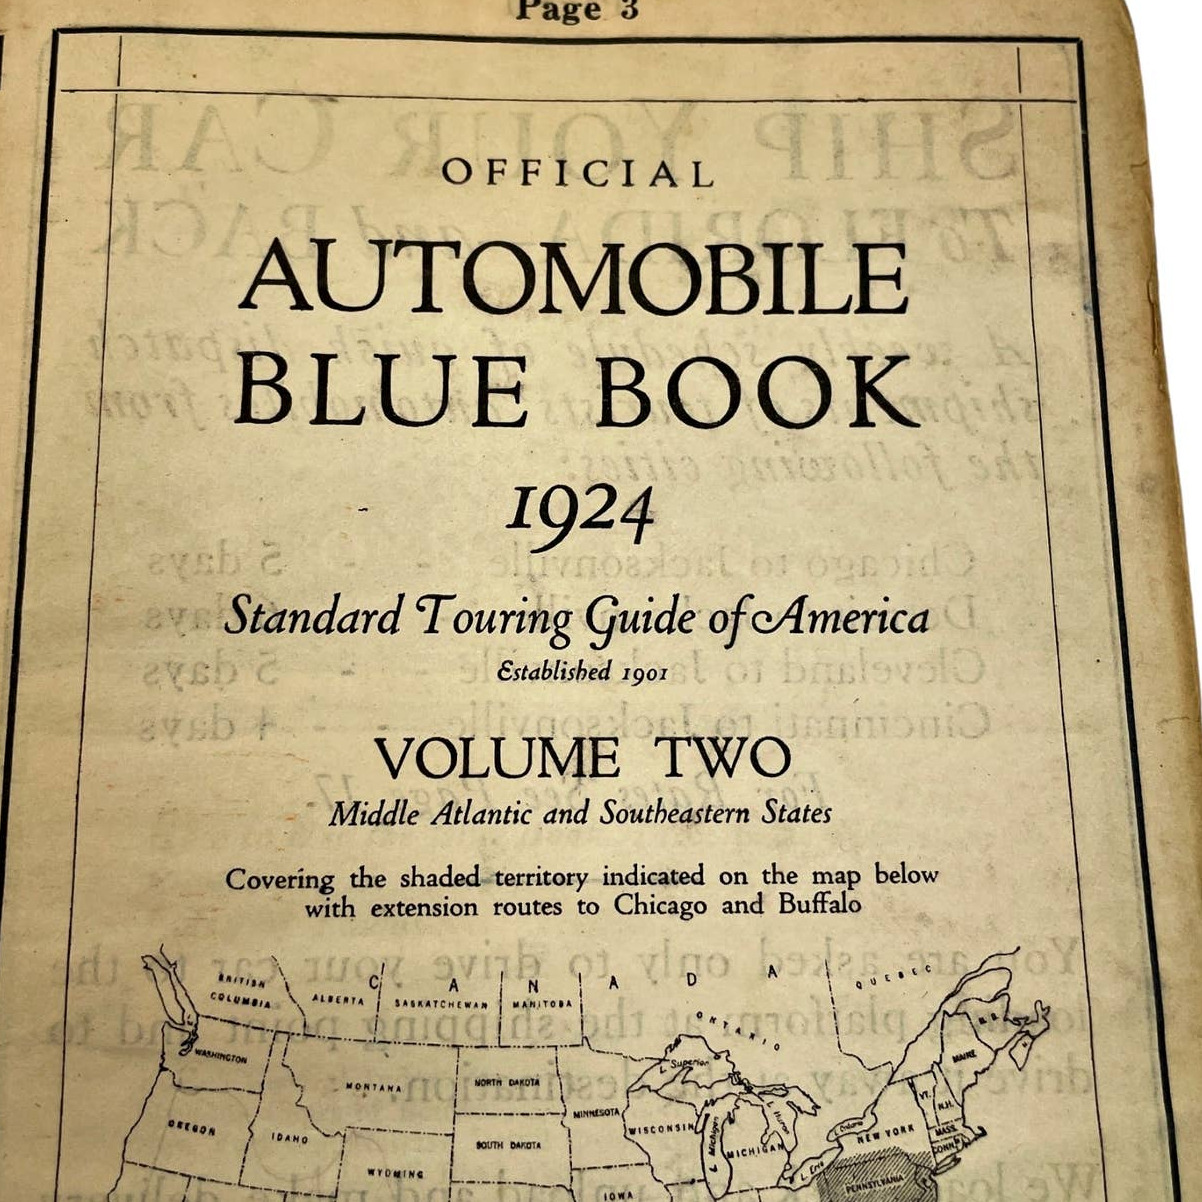 Automobile Blue Book 1924 Volume Two Middle Atlantic & Southeastern States